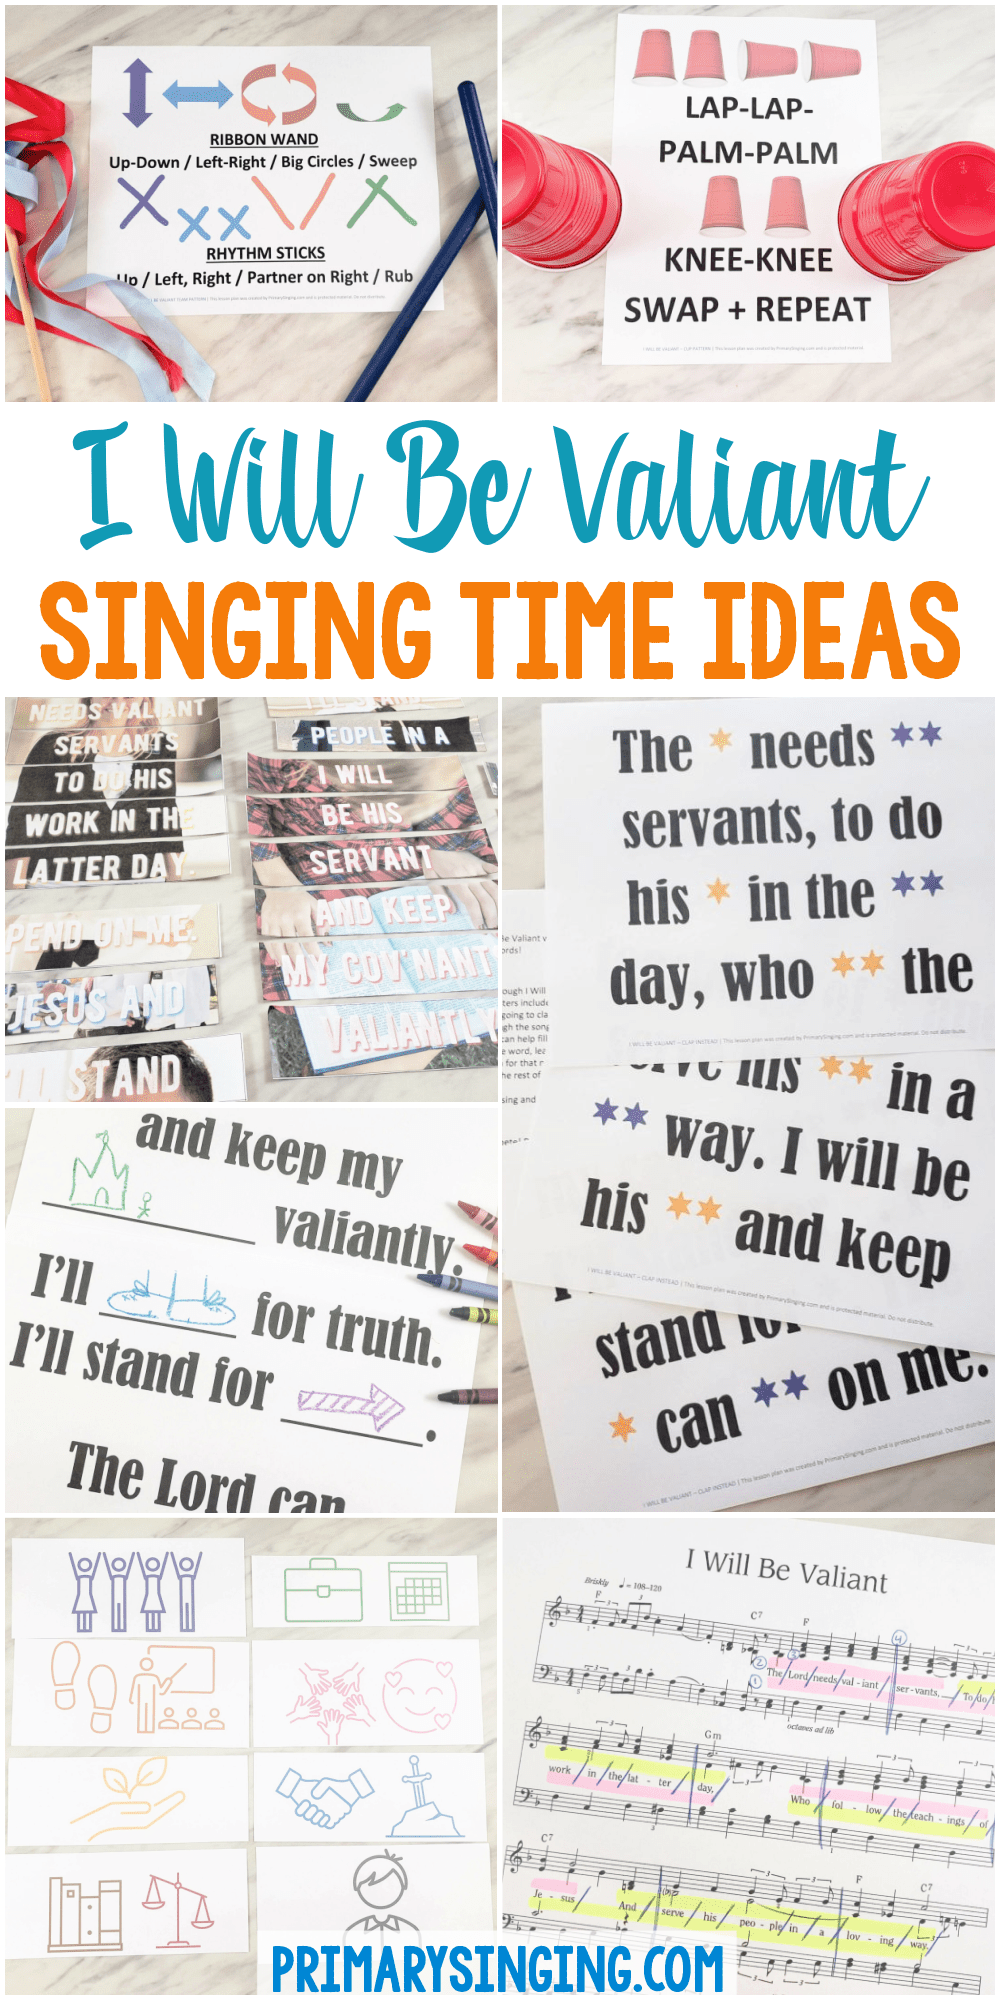 25 I Will Be Valiant singing time ideas with lots of printable song helps, visuals, flip charts, and lesson plans to help you teach this song for LDS Primary music leaders / Primary choristers. Includes ribbon wands, cup pattern, picture puzzle, clap instead, tag team singing, icon poster, and many more fun ideas!